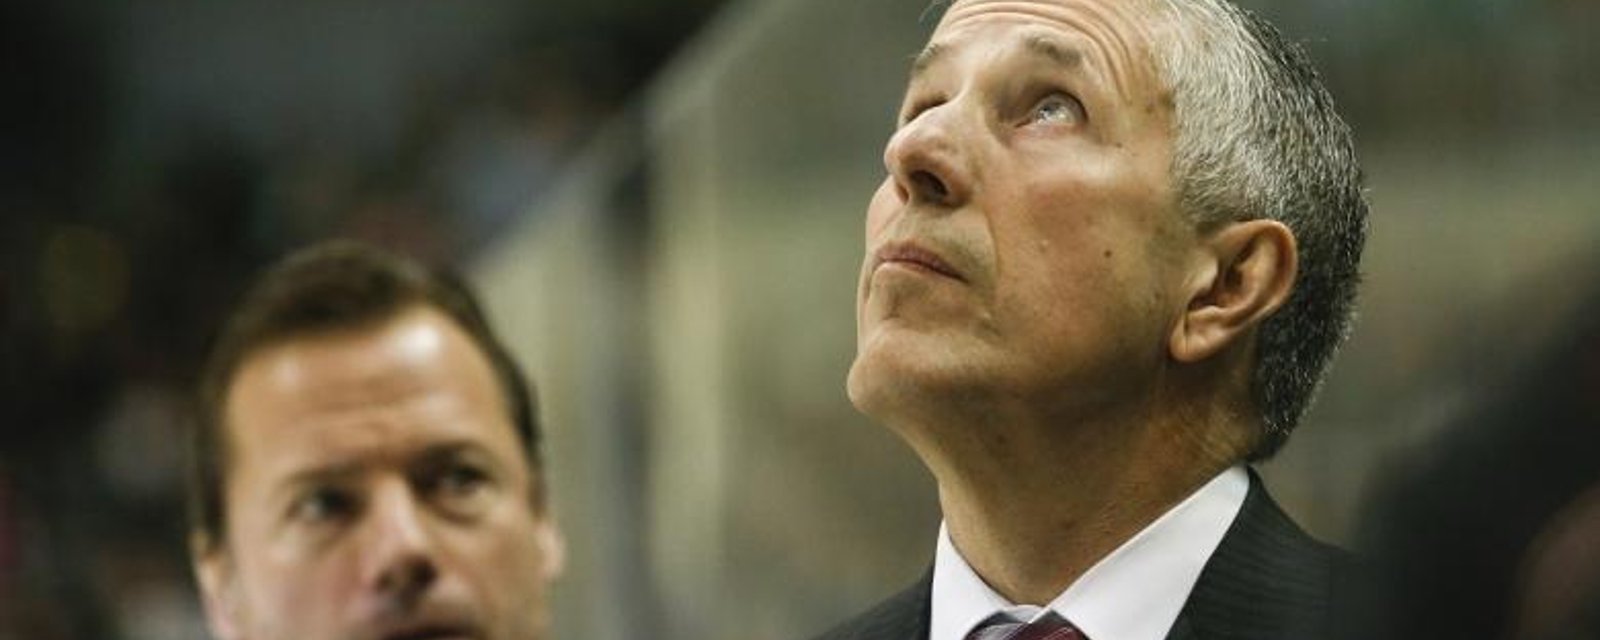 One of the most respected coaches in the NHL has been fired.